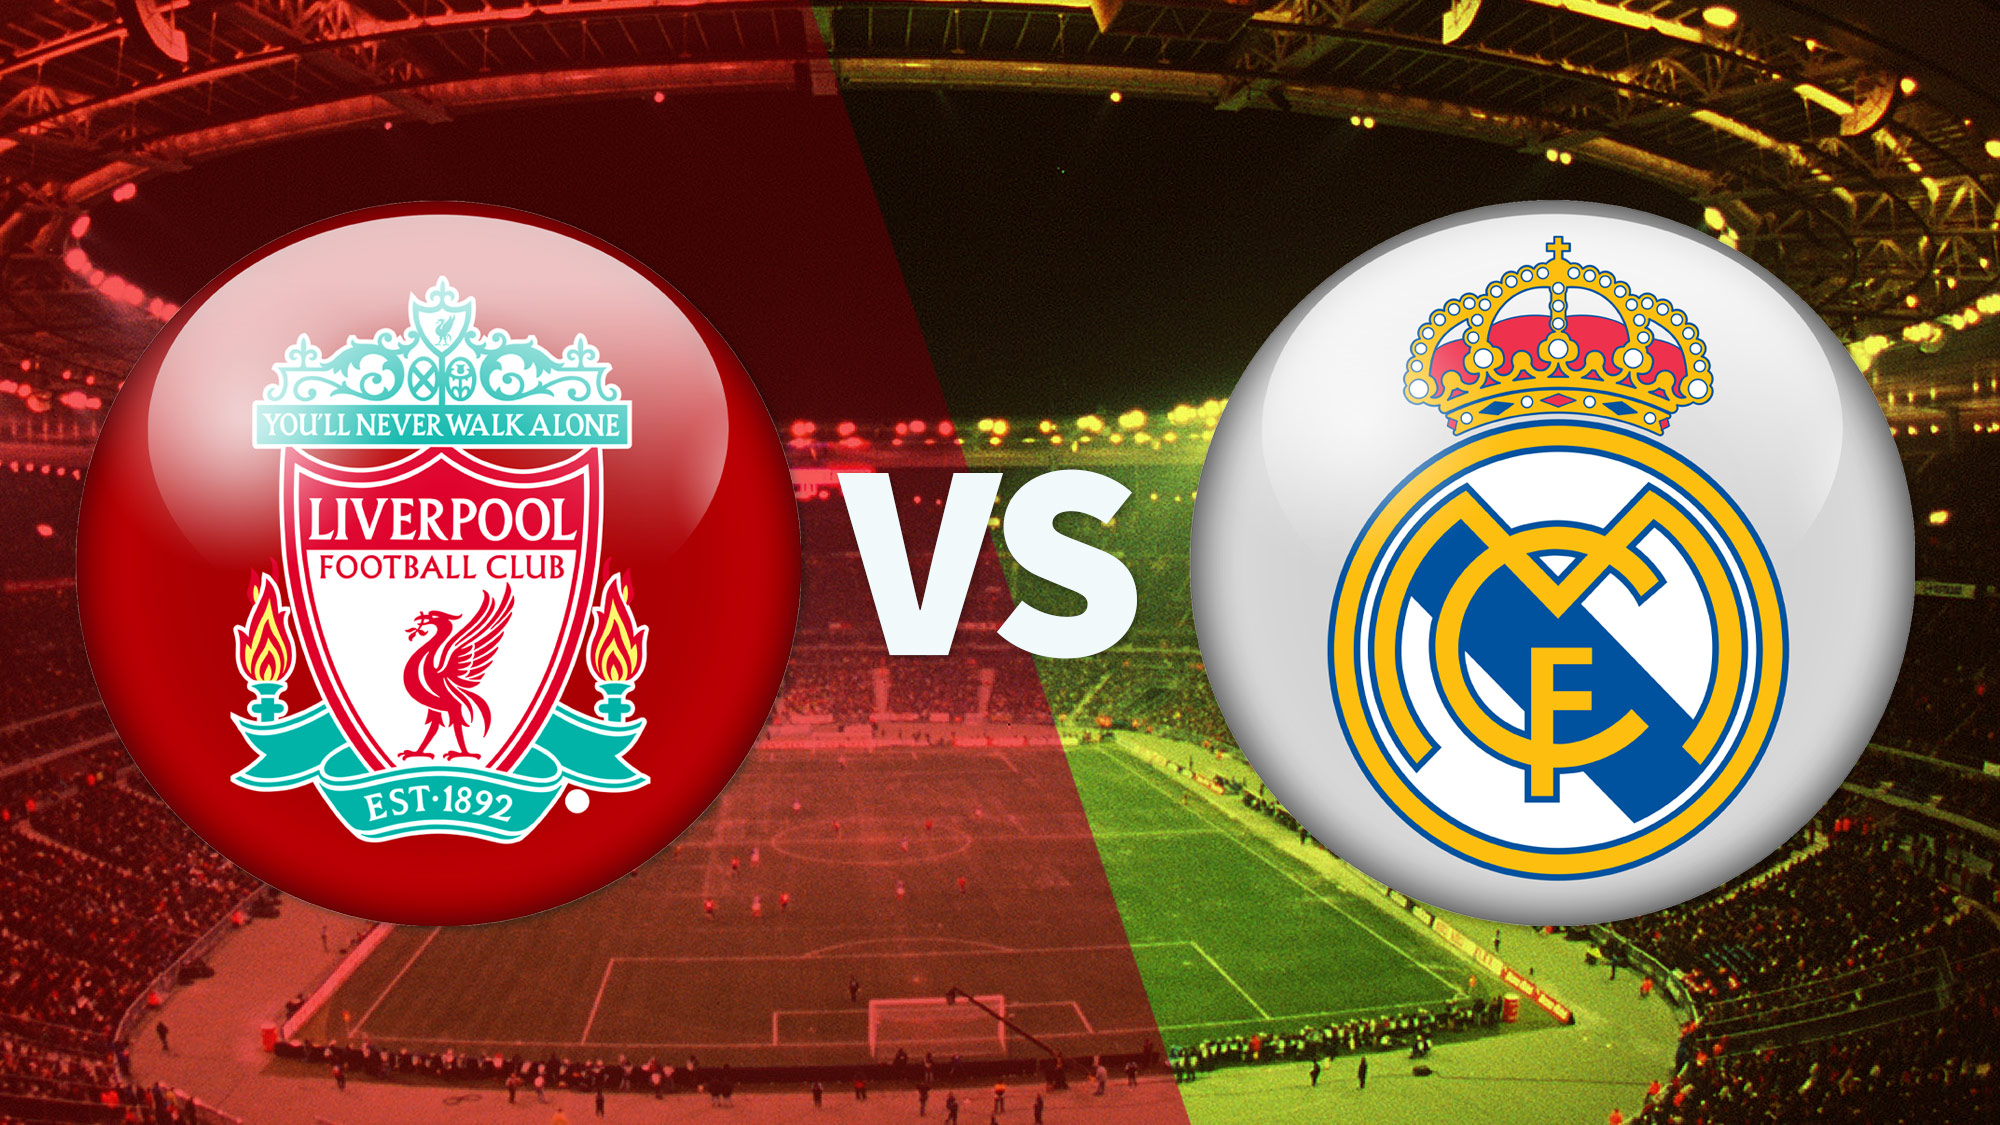 Liverpool vs Real Madrid Who will progress to the next round?